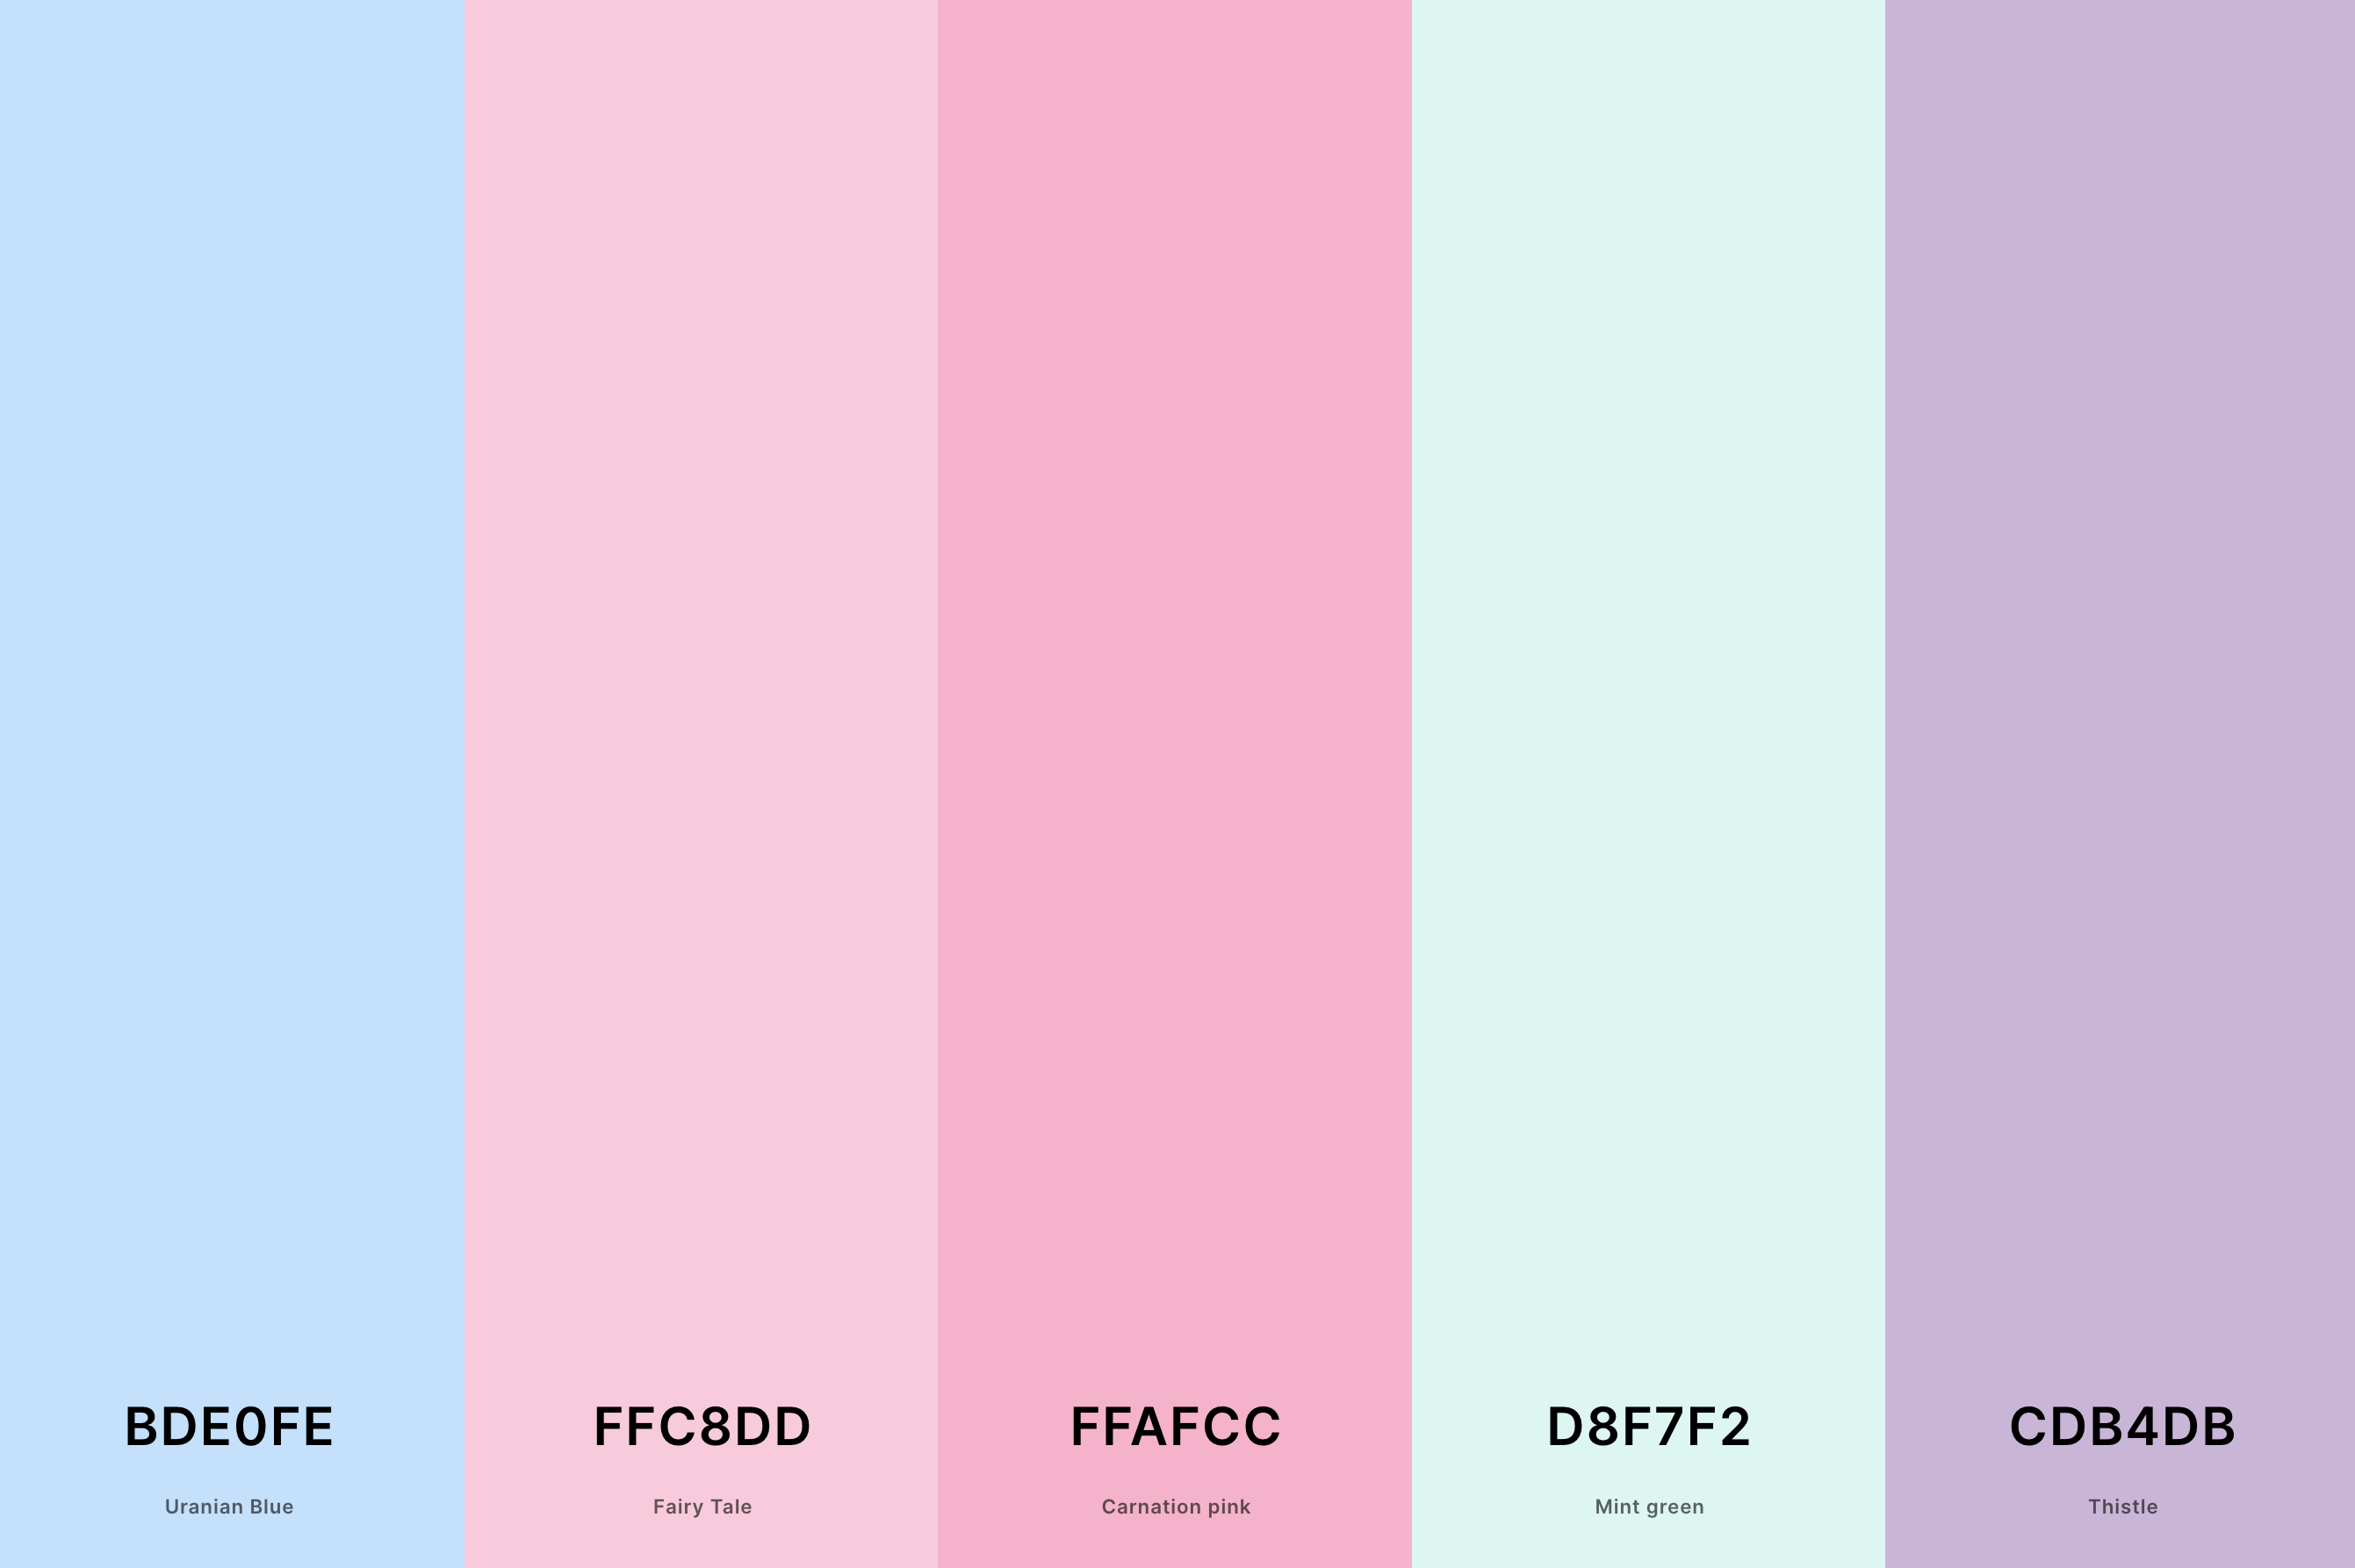 2. Aesthetic Pastel Color Palette Color Palette with Uranian Blue (Hex #BDE0FE) + Fairy Tale (Hex #FFC8DD) + Carnation Pink (Hex #FFAFCC) + Mint Green (Hex #D8F7F2) + Thistle (Hex #CDB4DB) Color Palette with Hex Codes